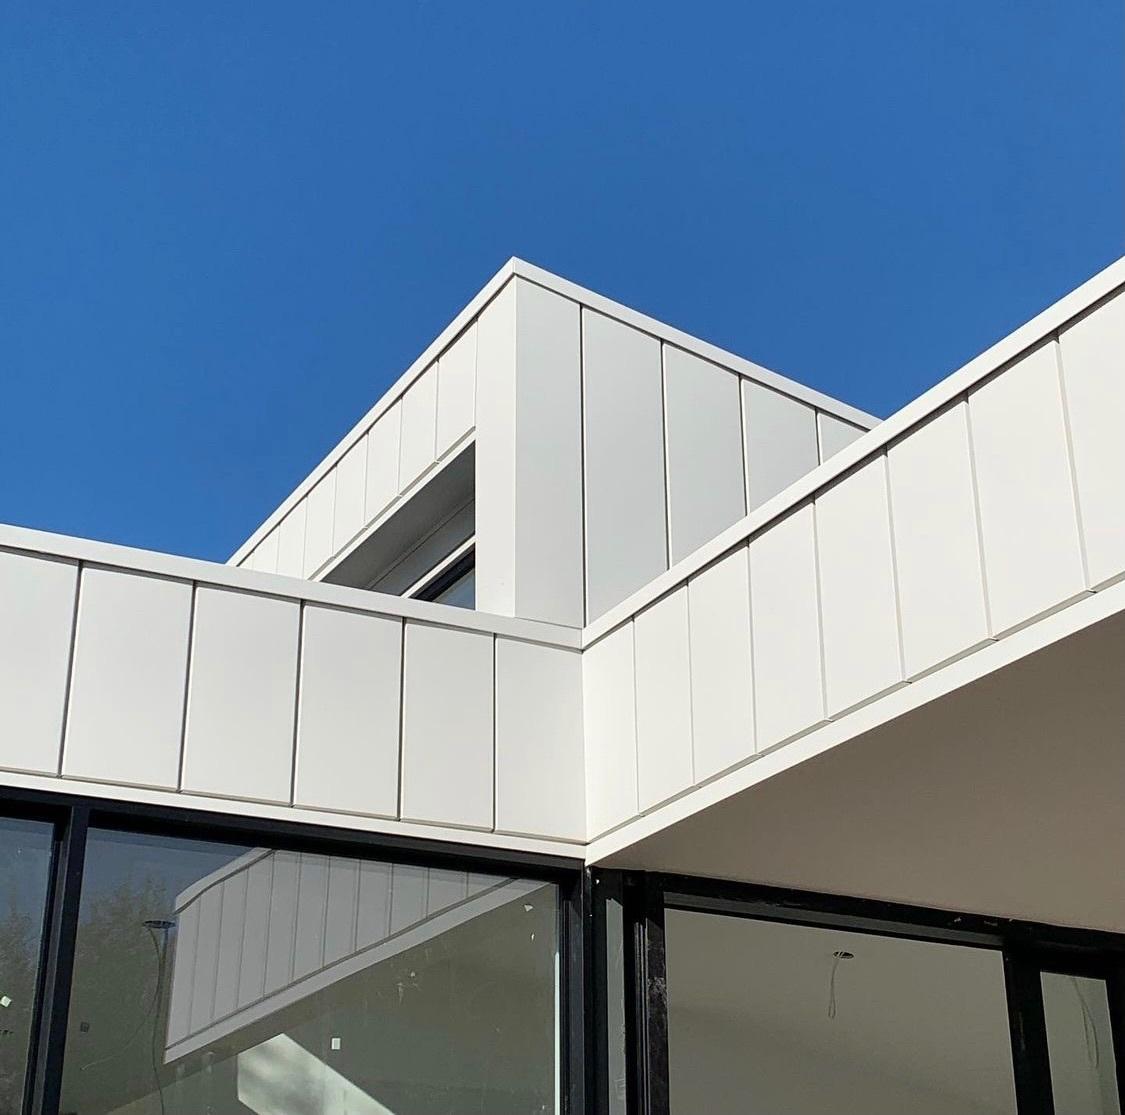 Edwina from Oakleigh, VIC loves COLORBOND® steel. Roofing and Walling made from COLORBOND® steel in colour Surfmist® Matt